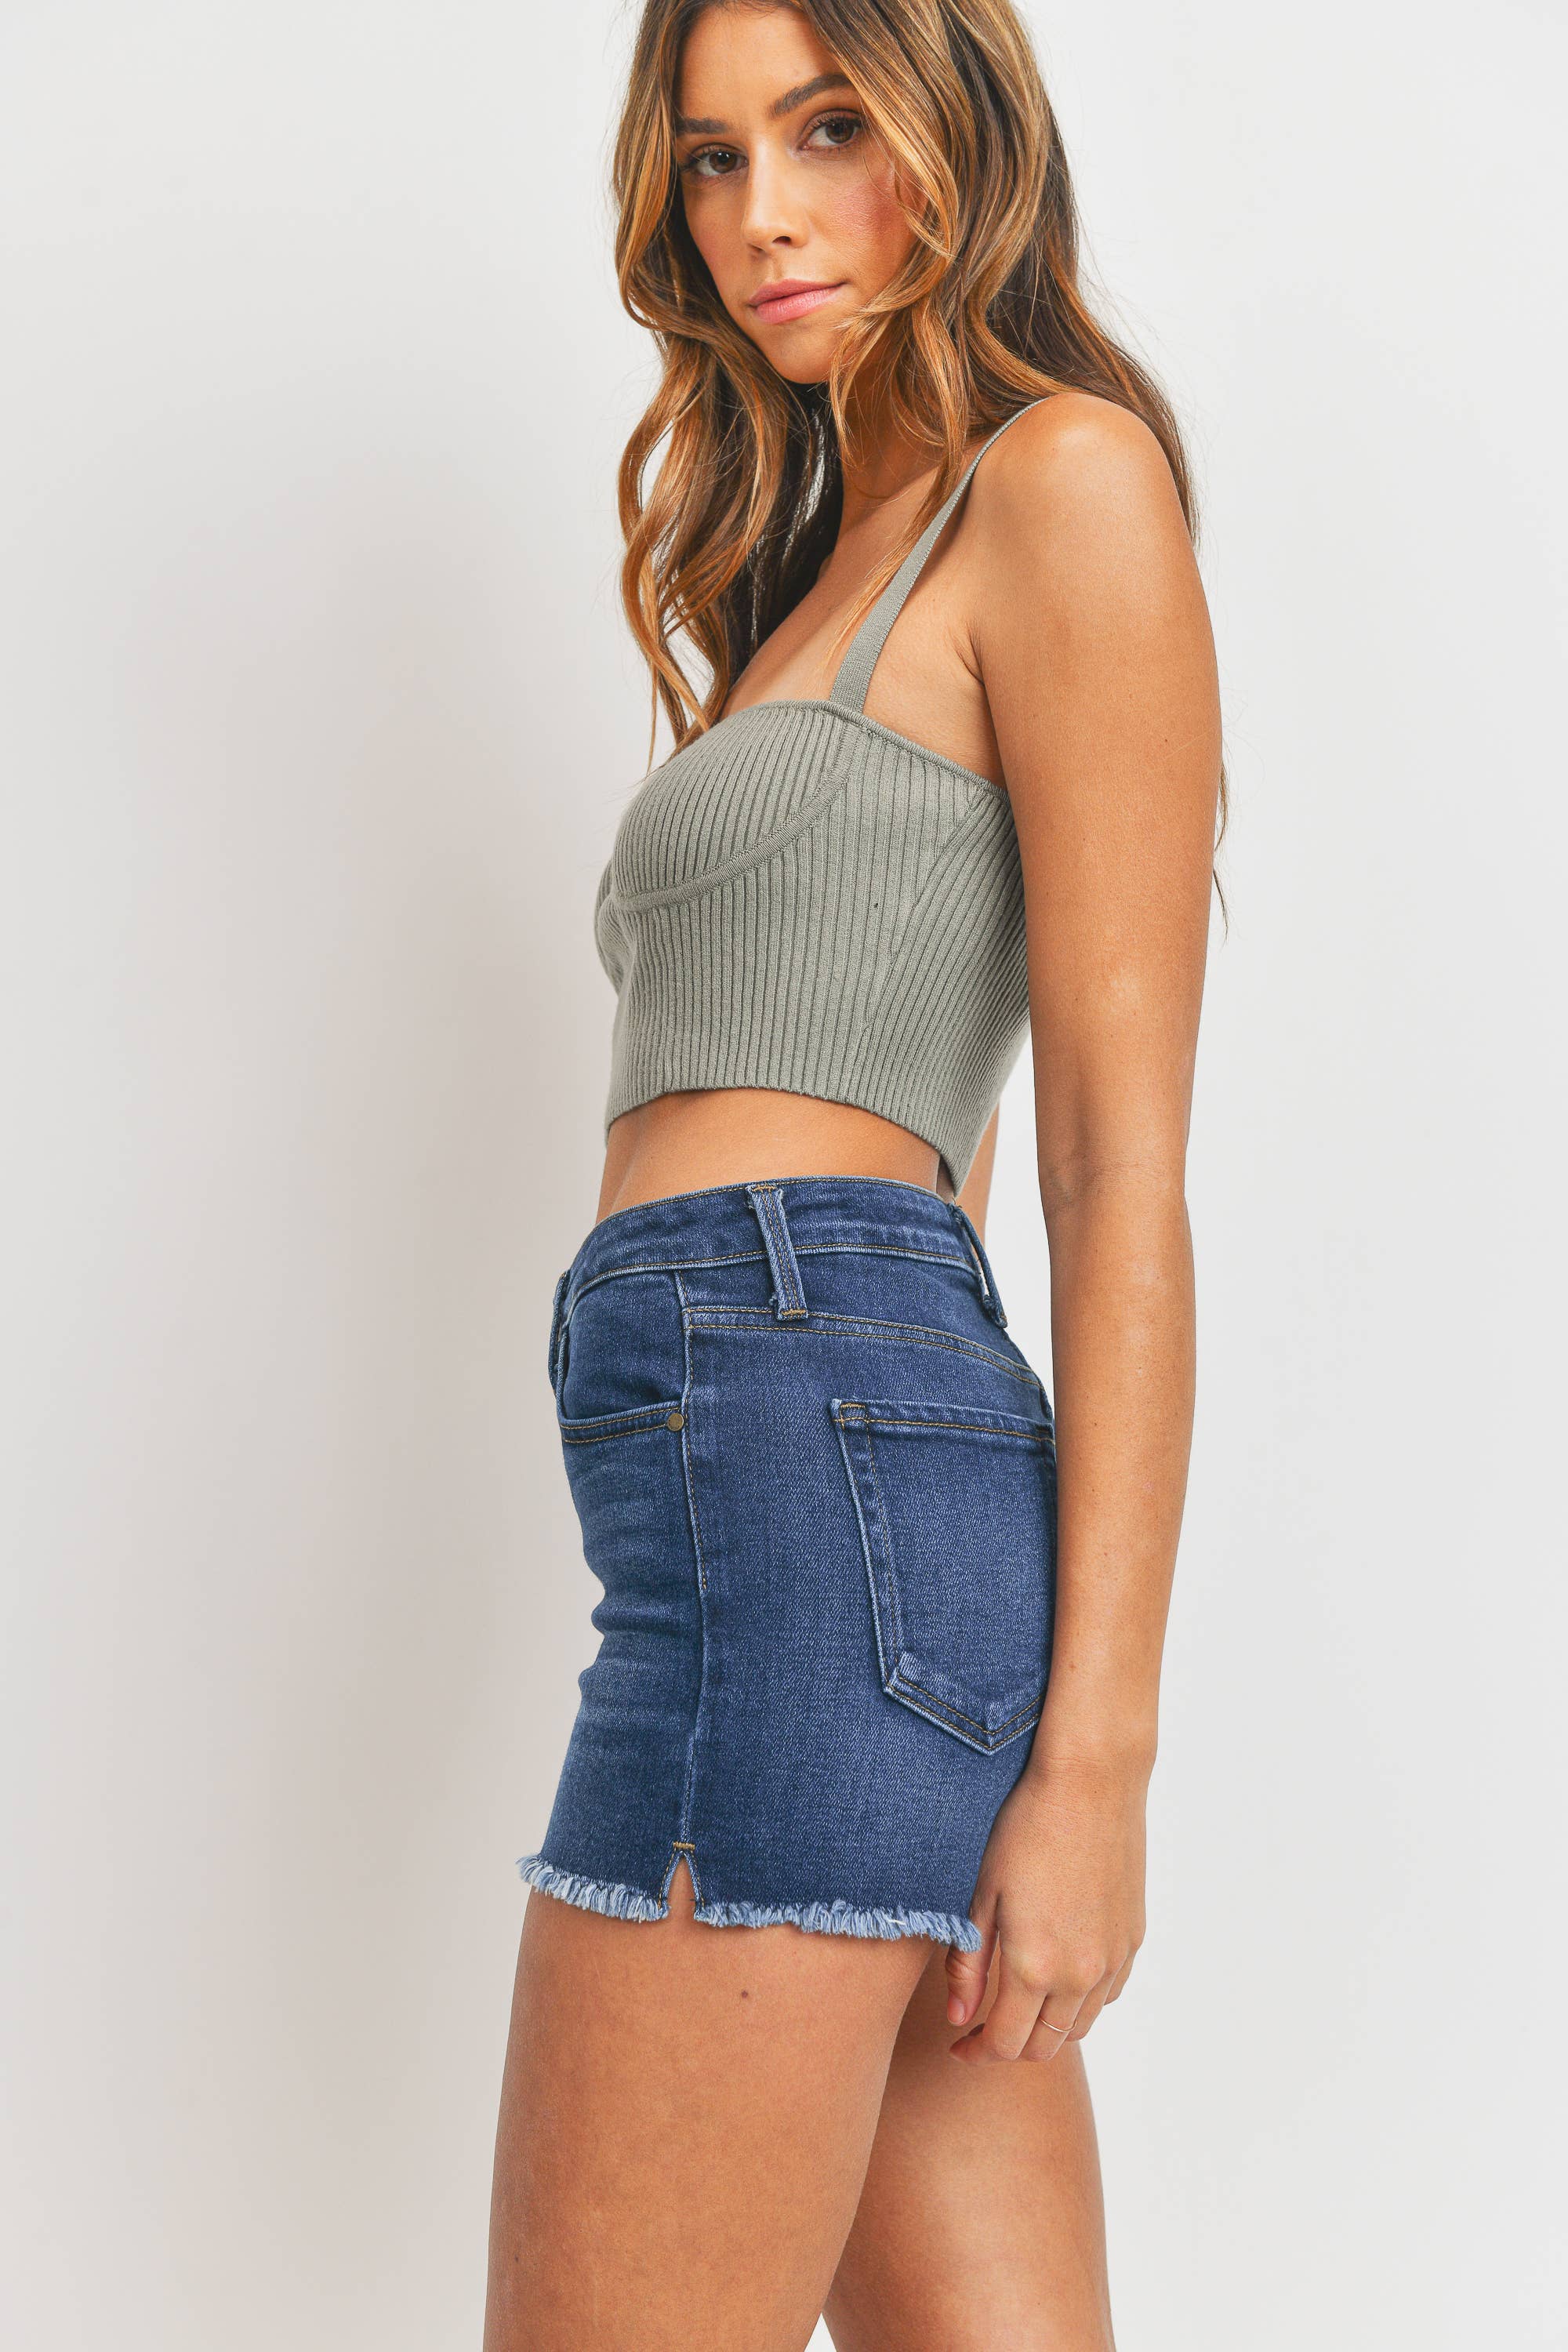 The Weekend Jean Shorts by Just Black Denim